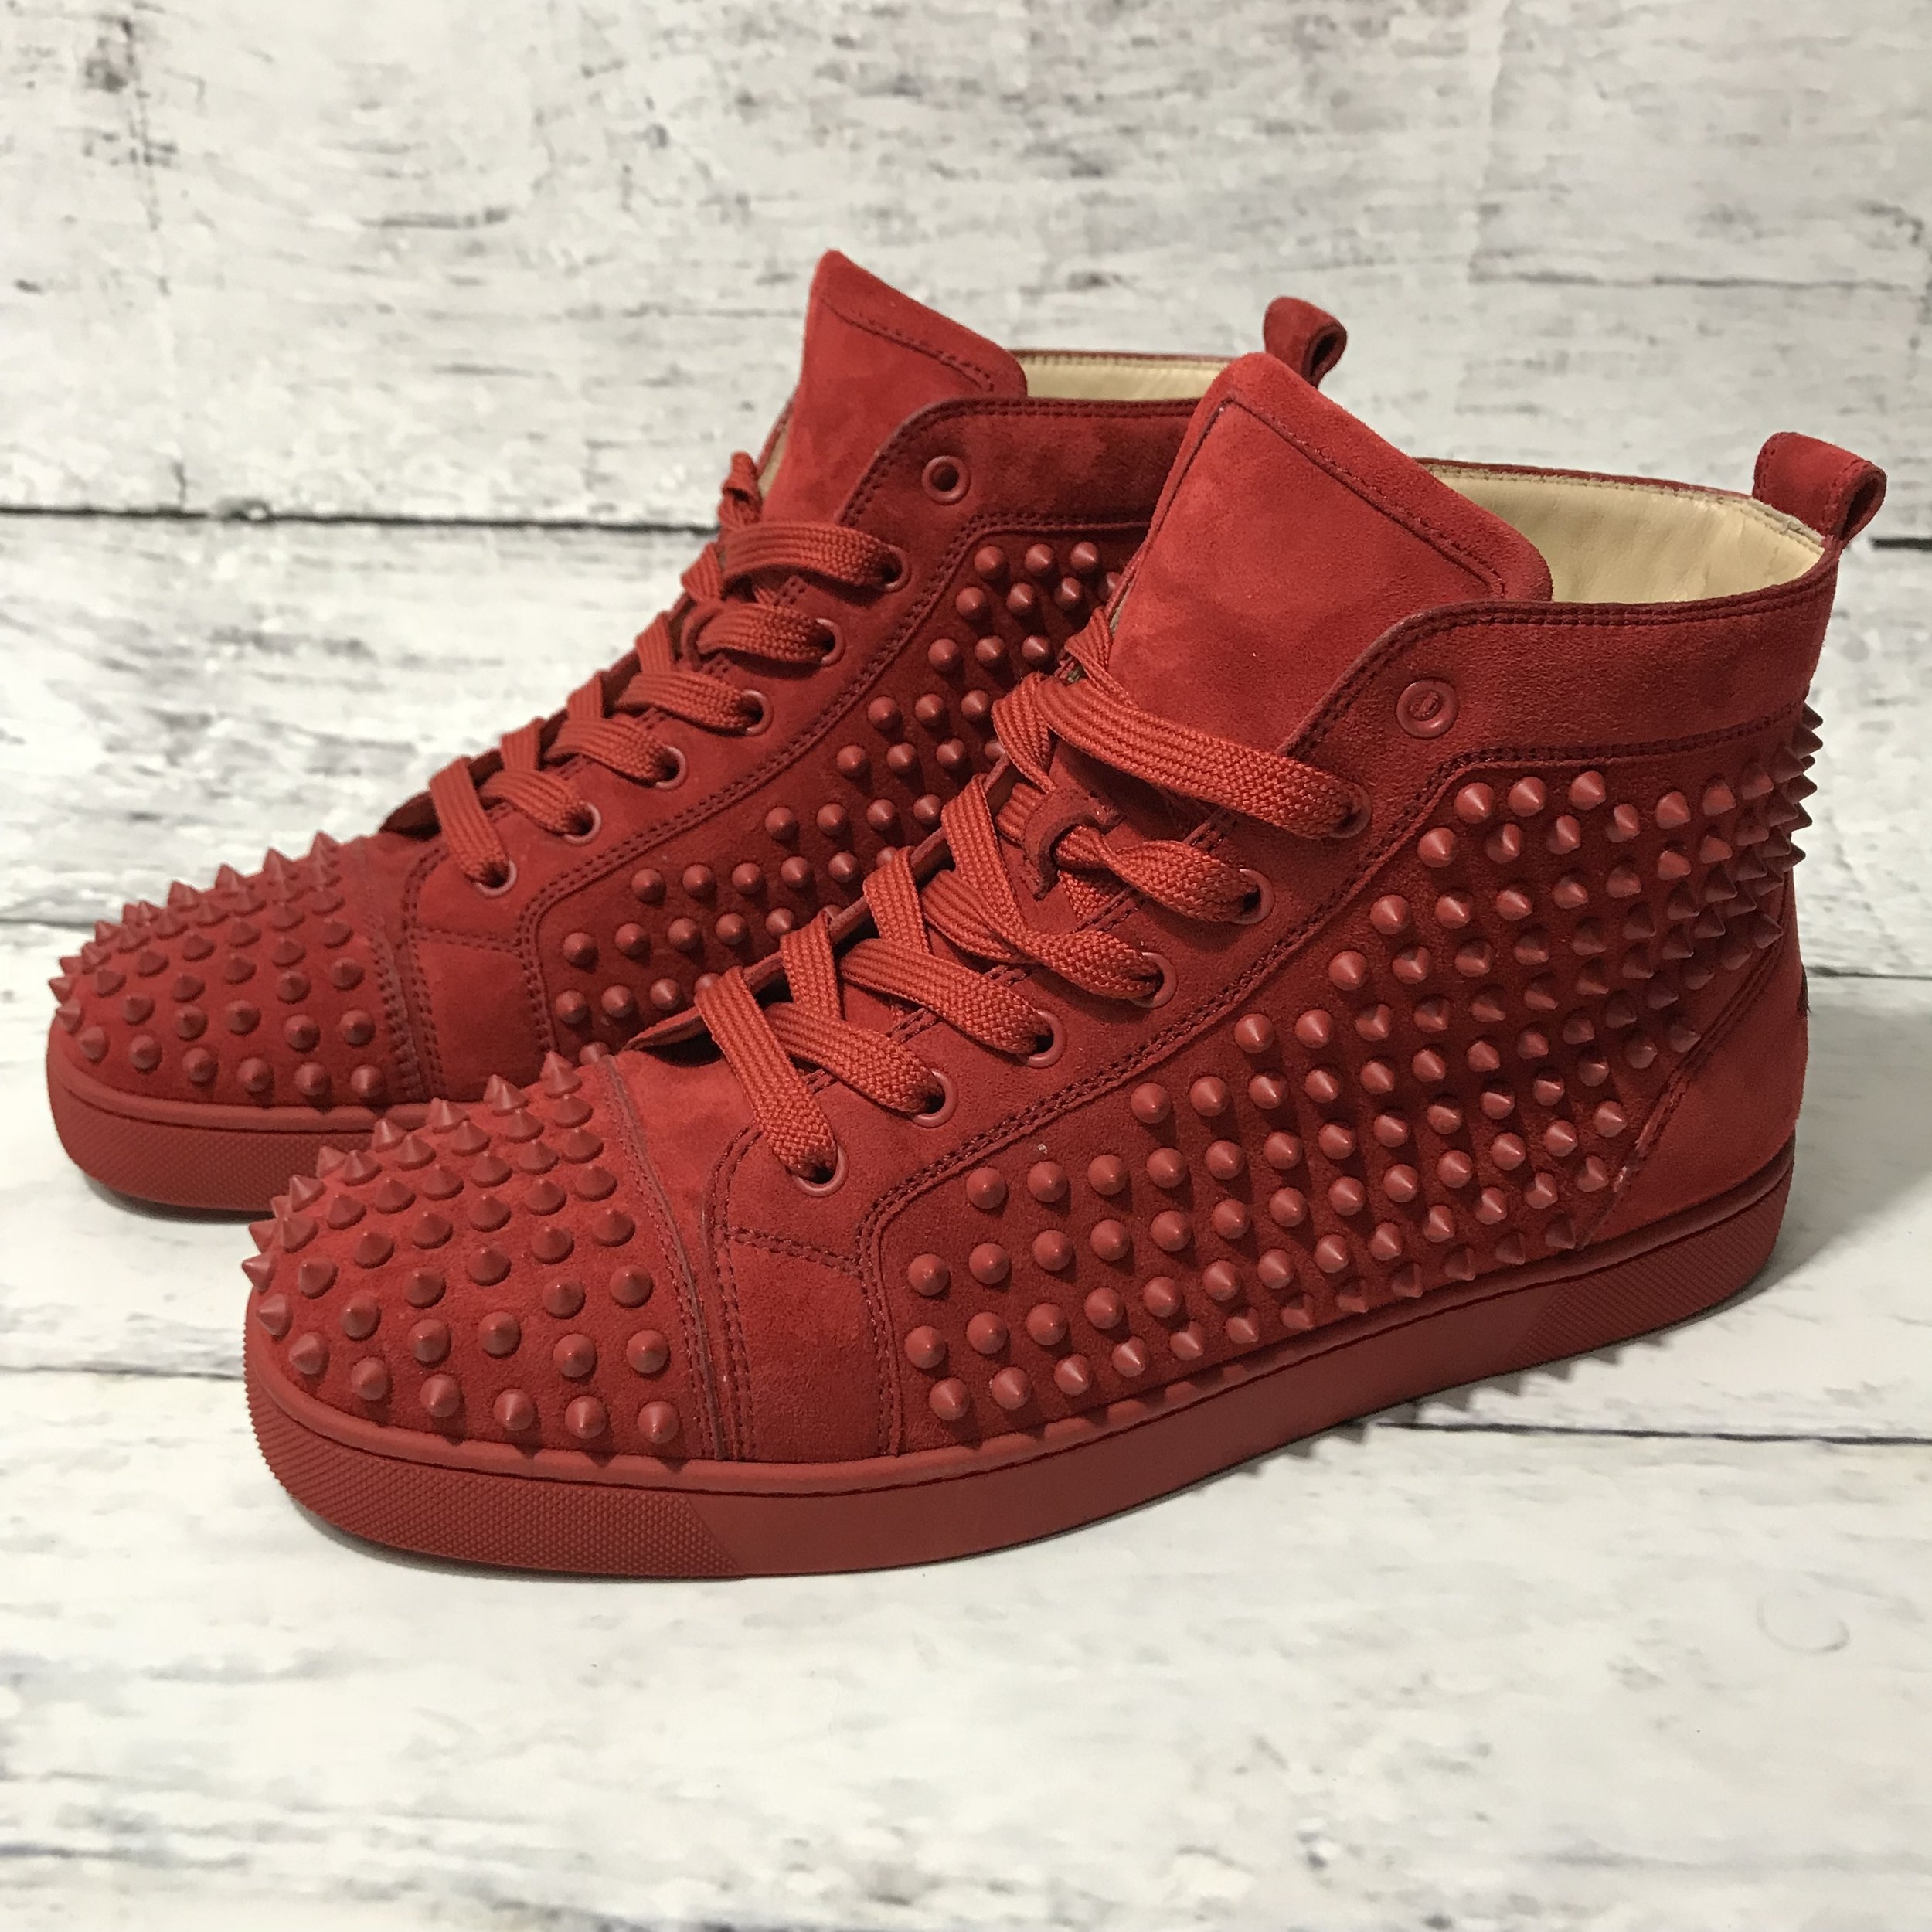 Christian Louboutin red suede spiked 